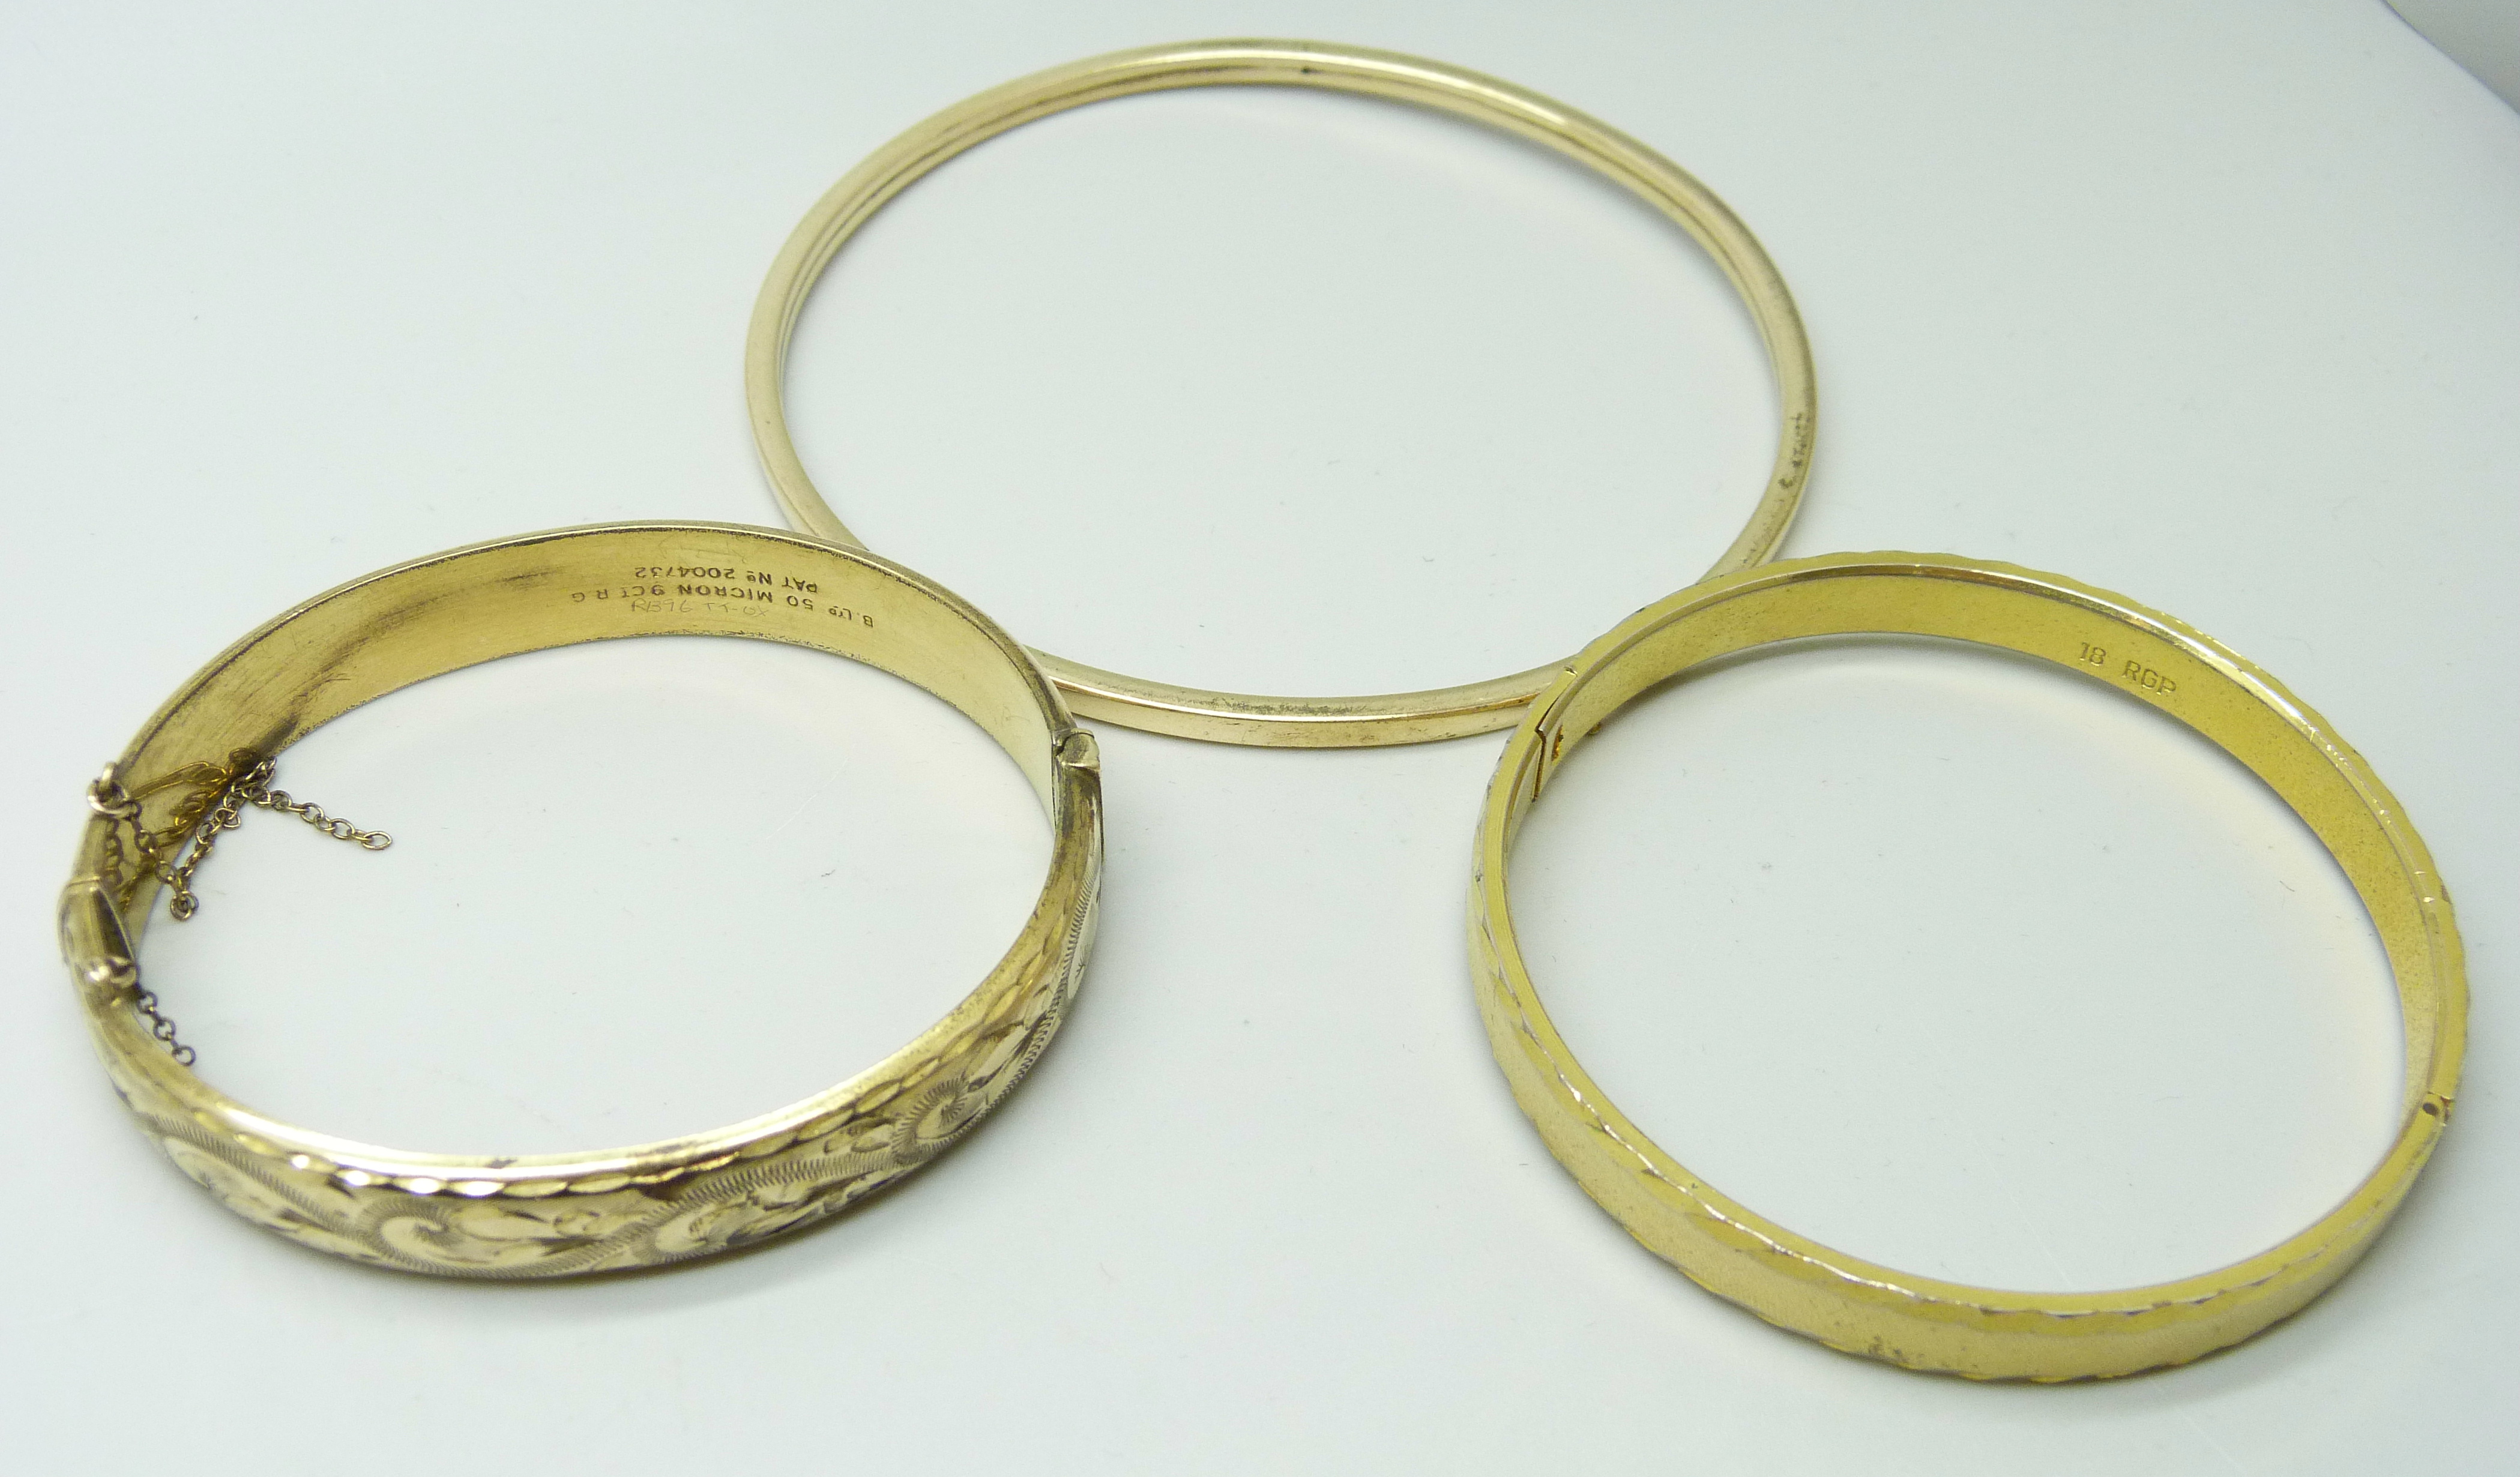 Three vintage rolled gold bangles